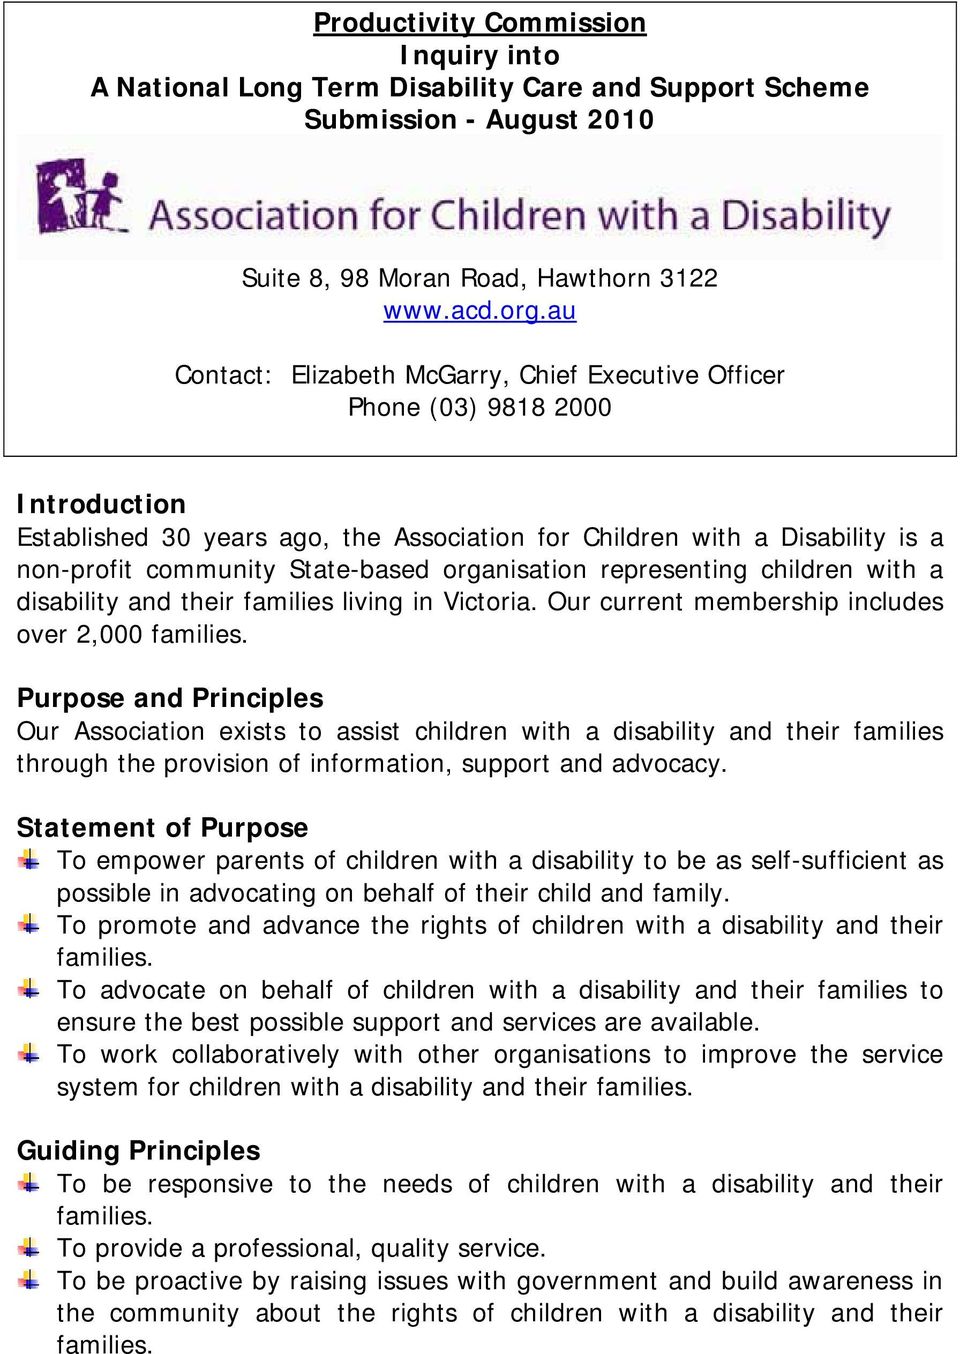 organisation representing children with a disability and their families living in Victoria. Our current membership includes over 2,000 families.